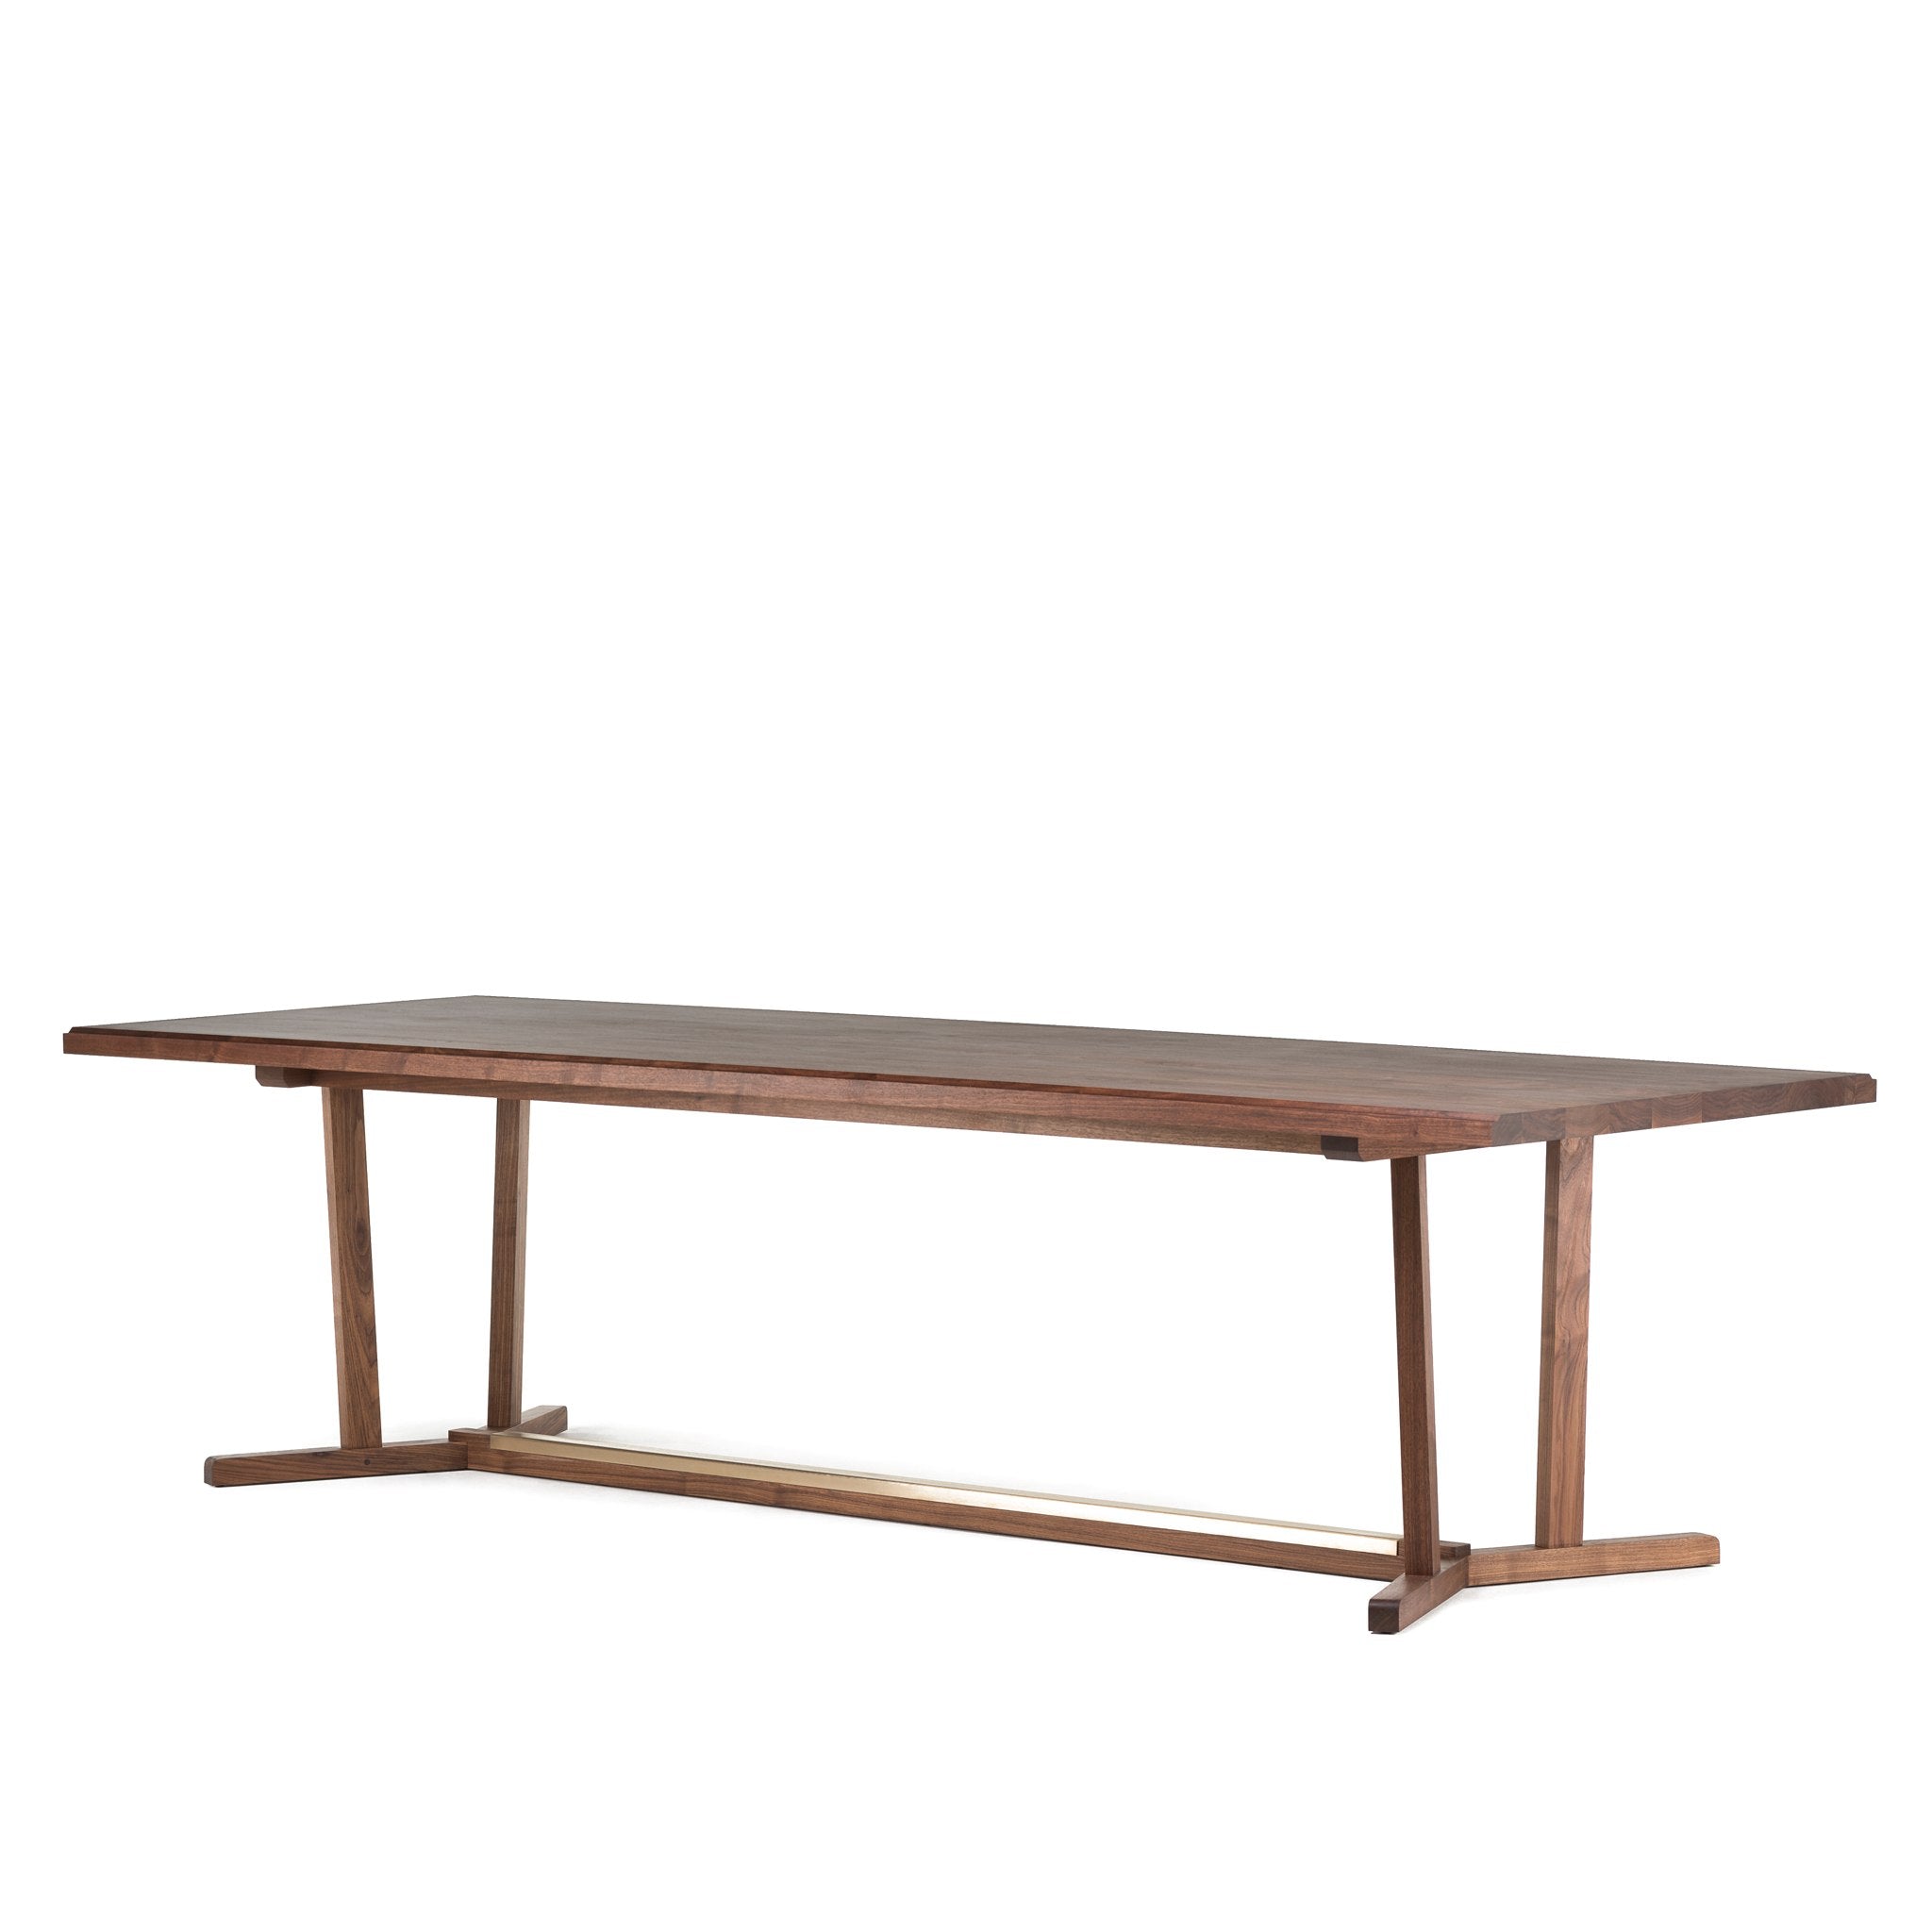 Shaker Dining Table Timber Top by Neri & Hu